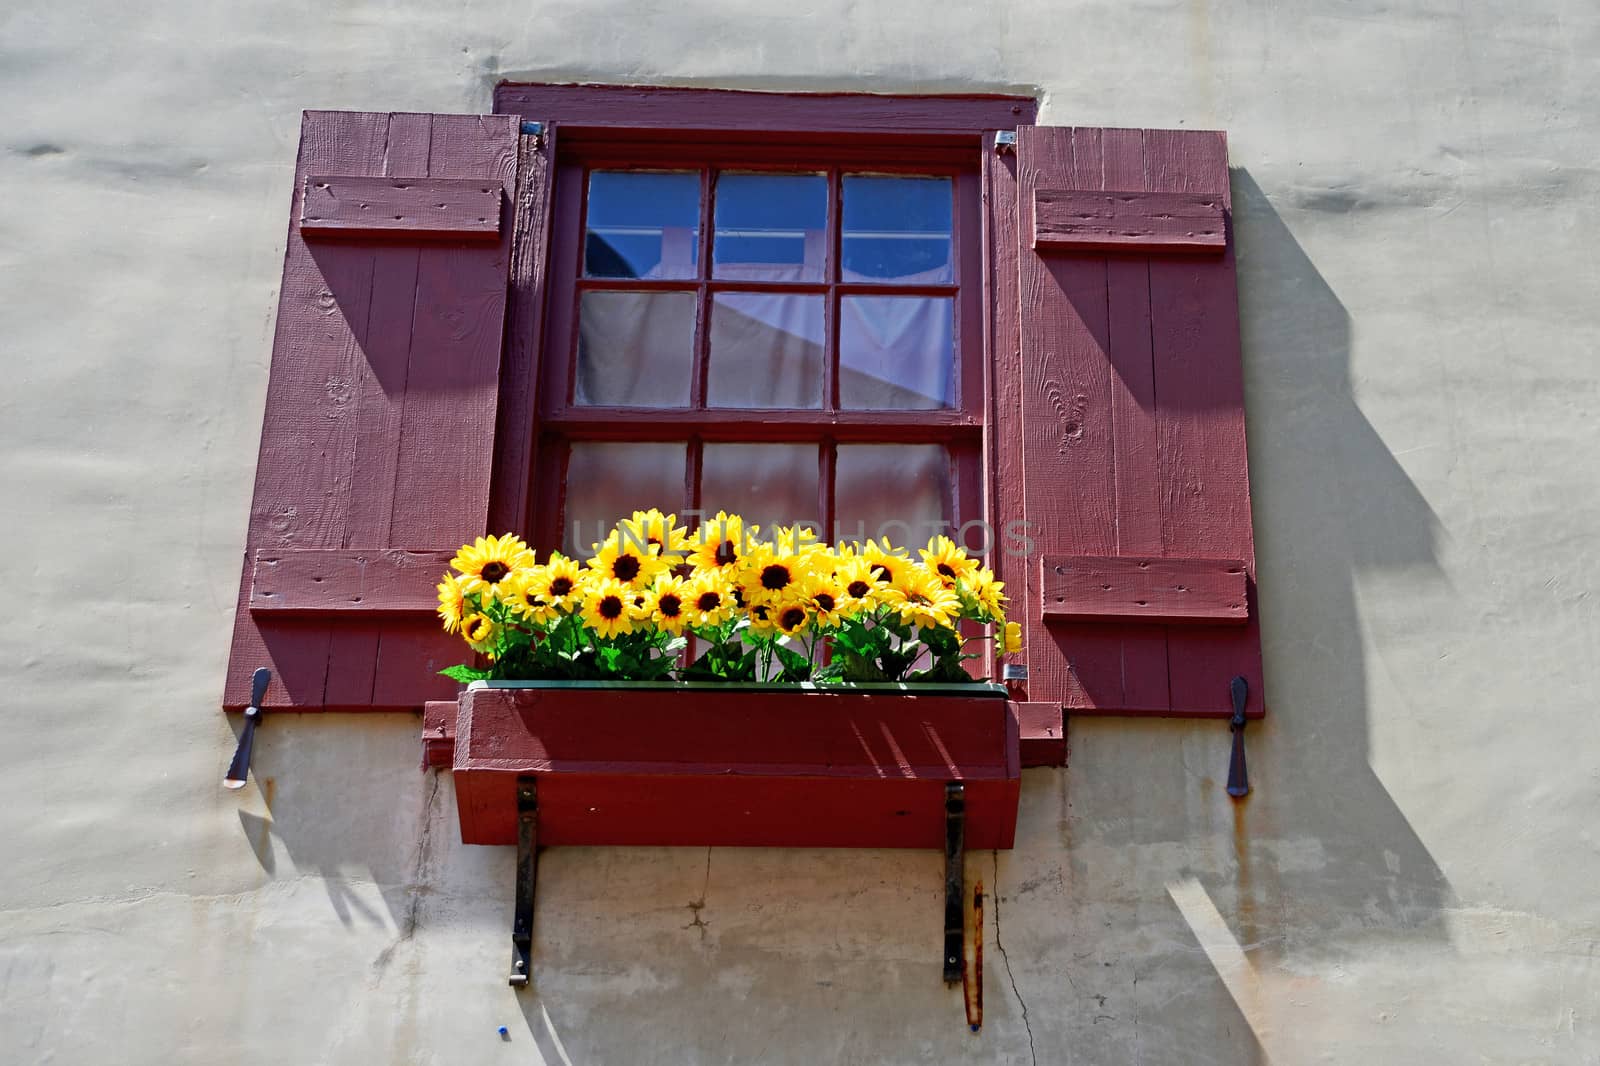 window with flowers in renaissance city in europe by ftlaudgirl